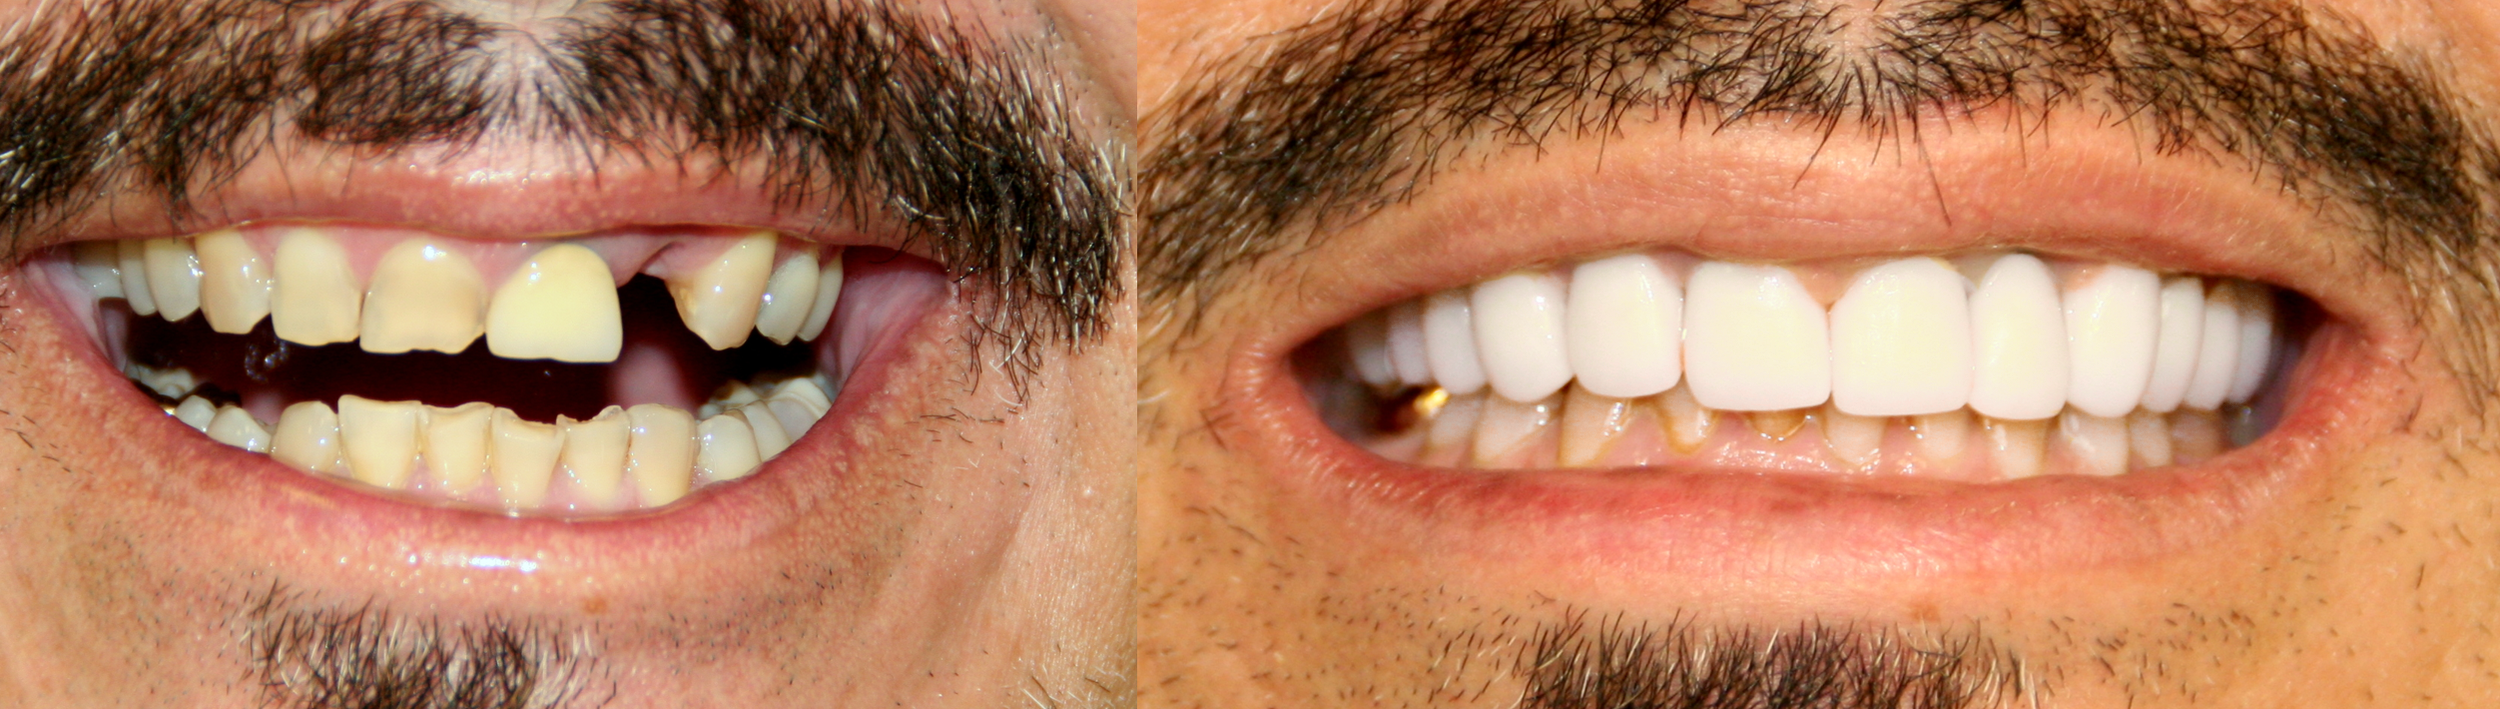  Dr. Ingram restored this patient's upper arch after years of wear and tear. 